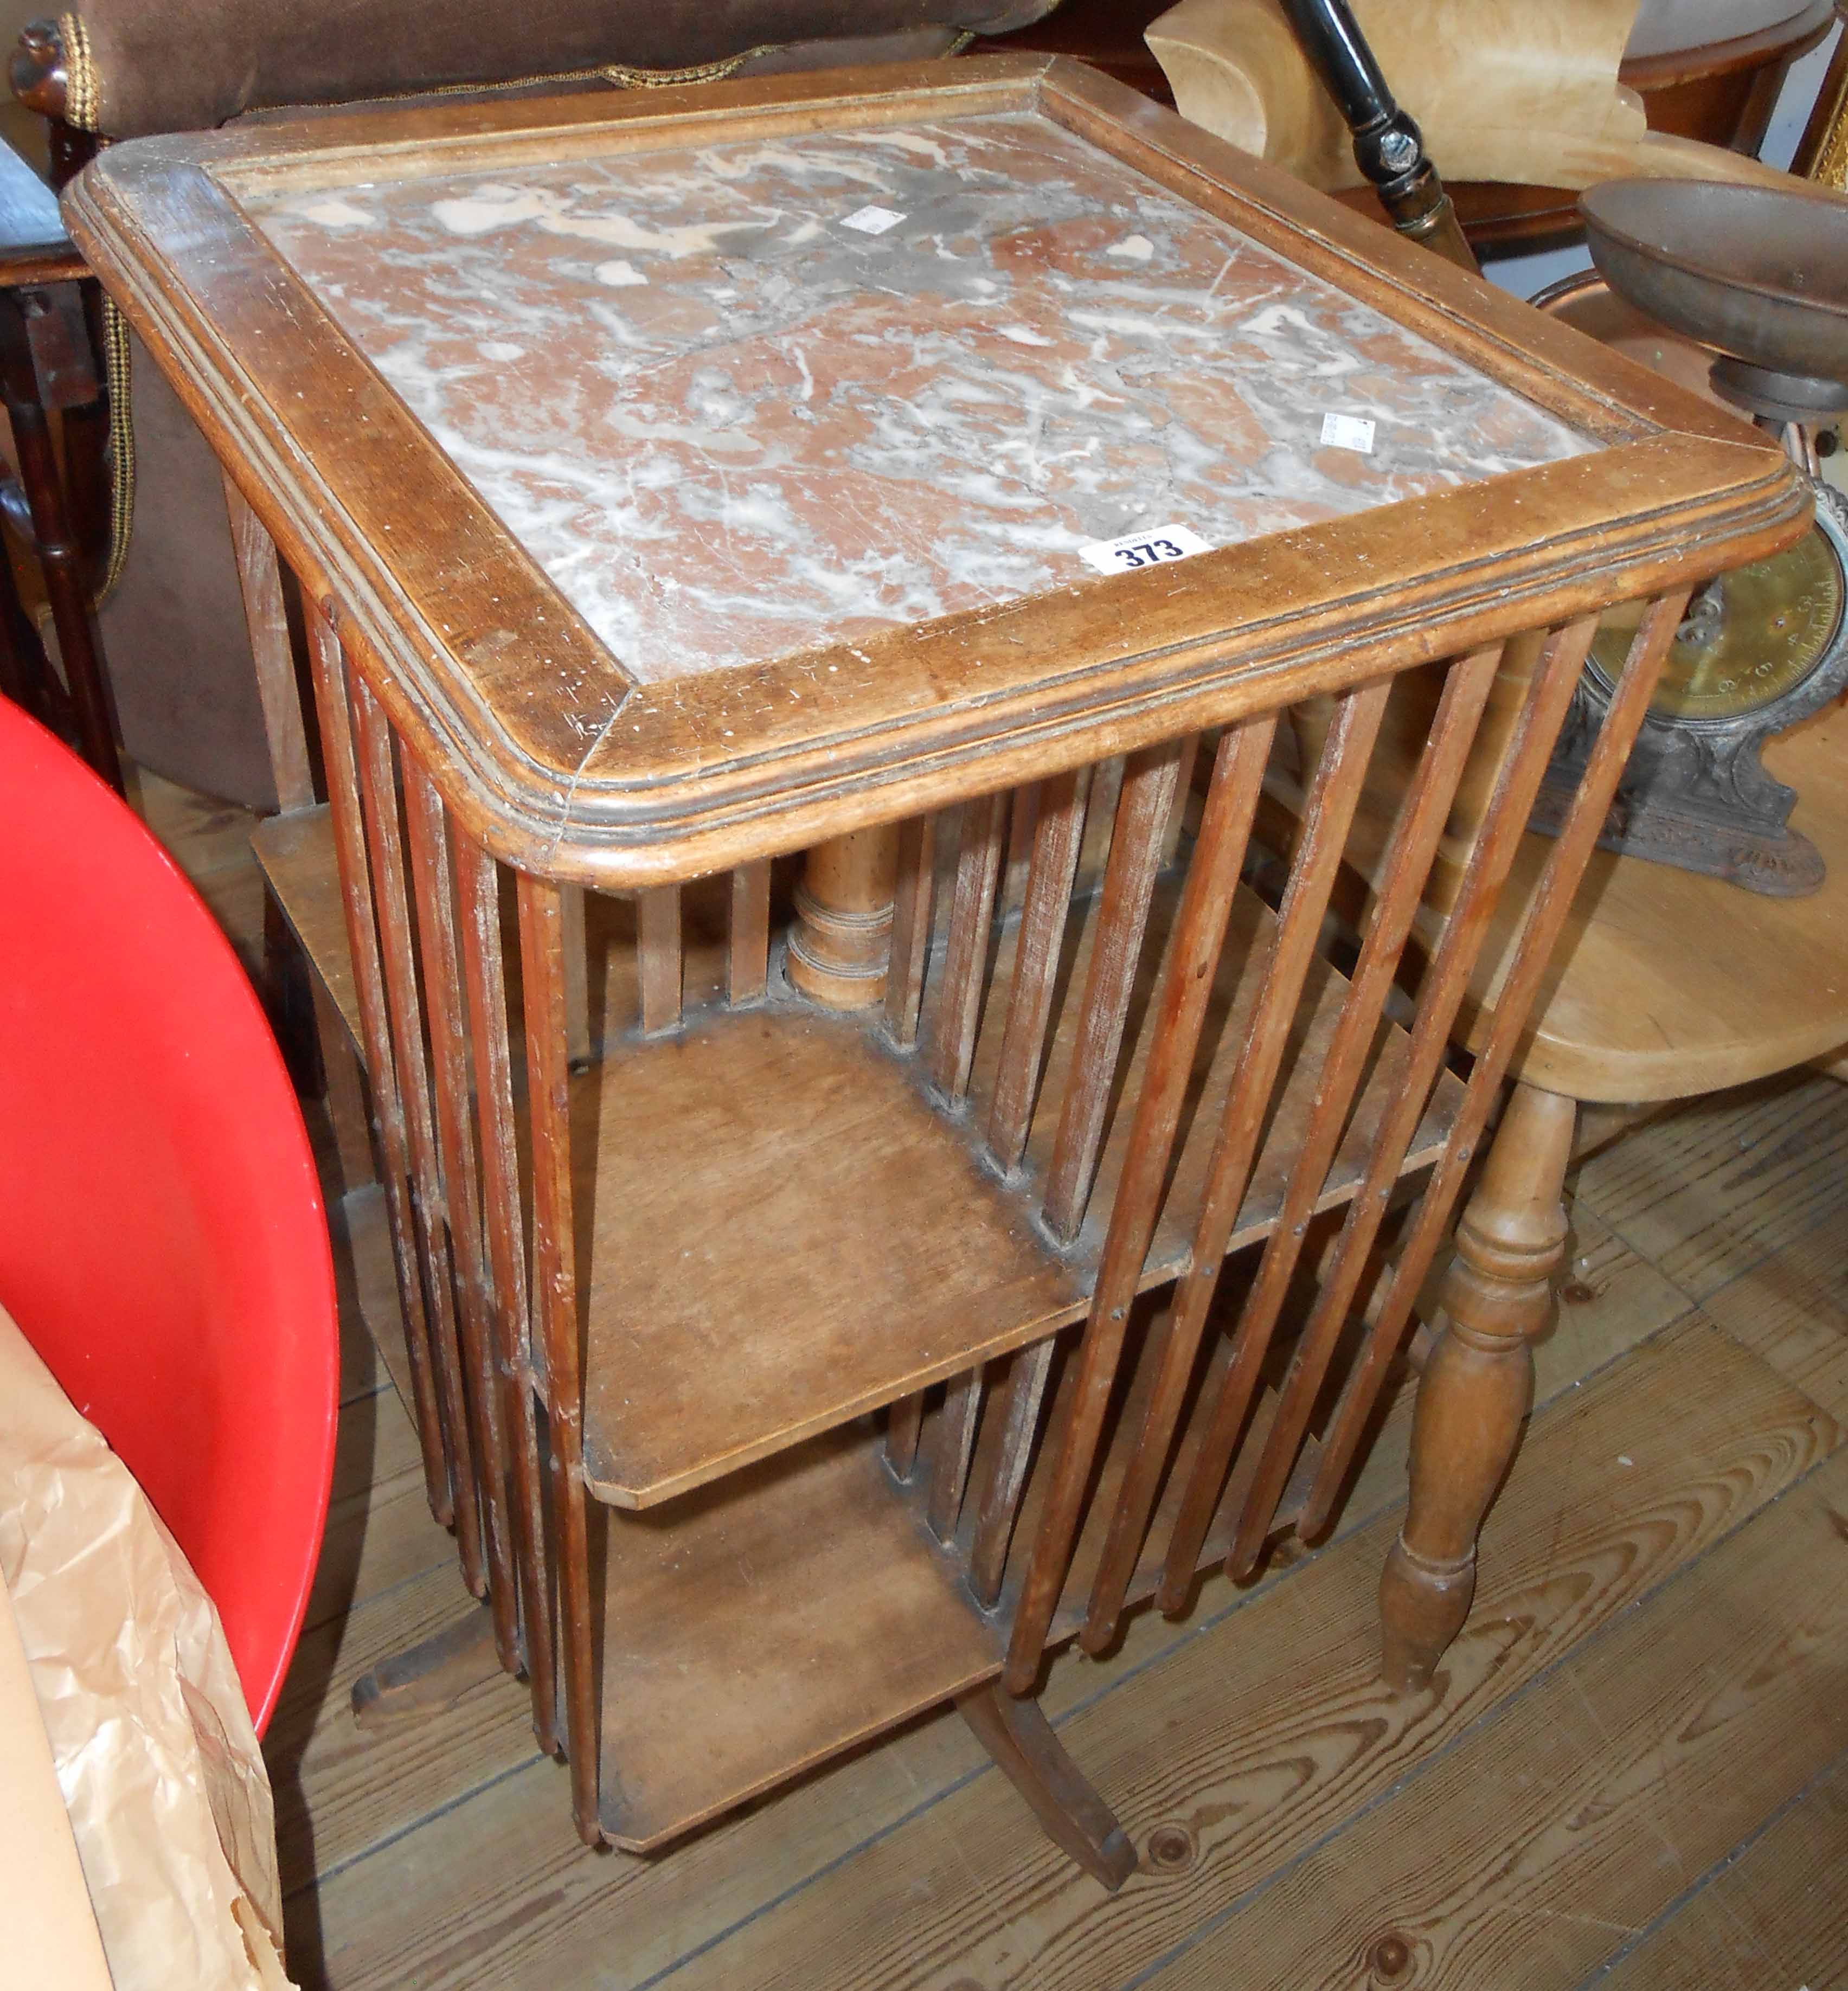 A French stained mixed wood revolving bookcase with marble inset top and slatted dividers - old worm